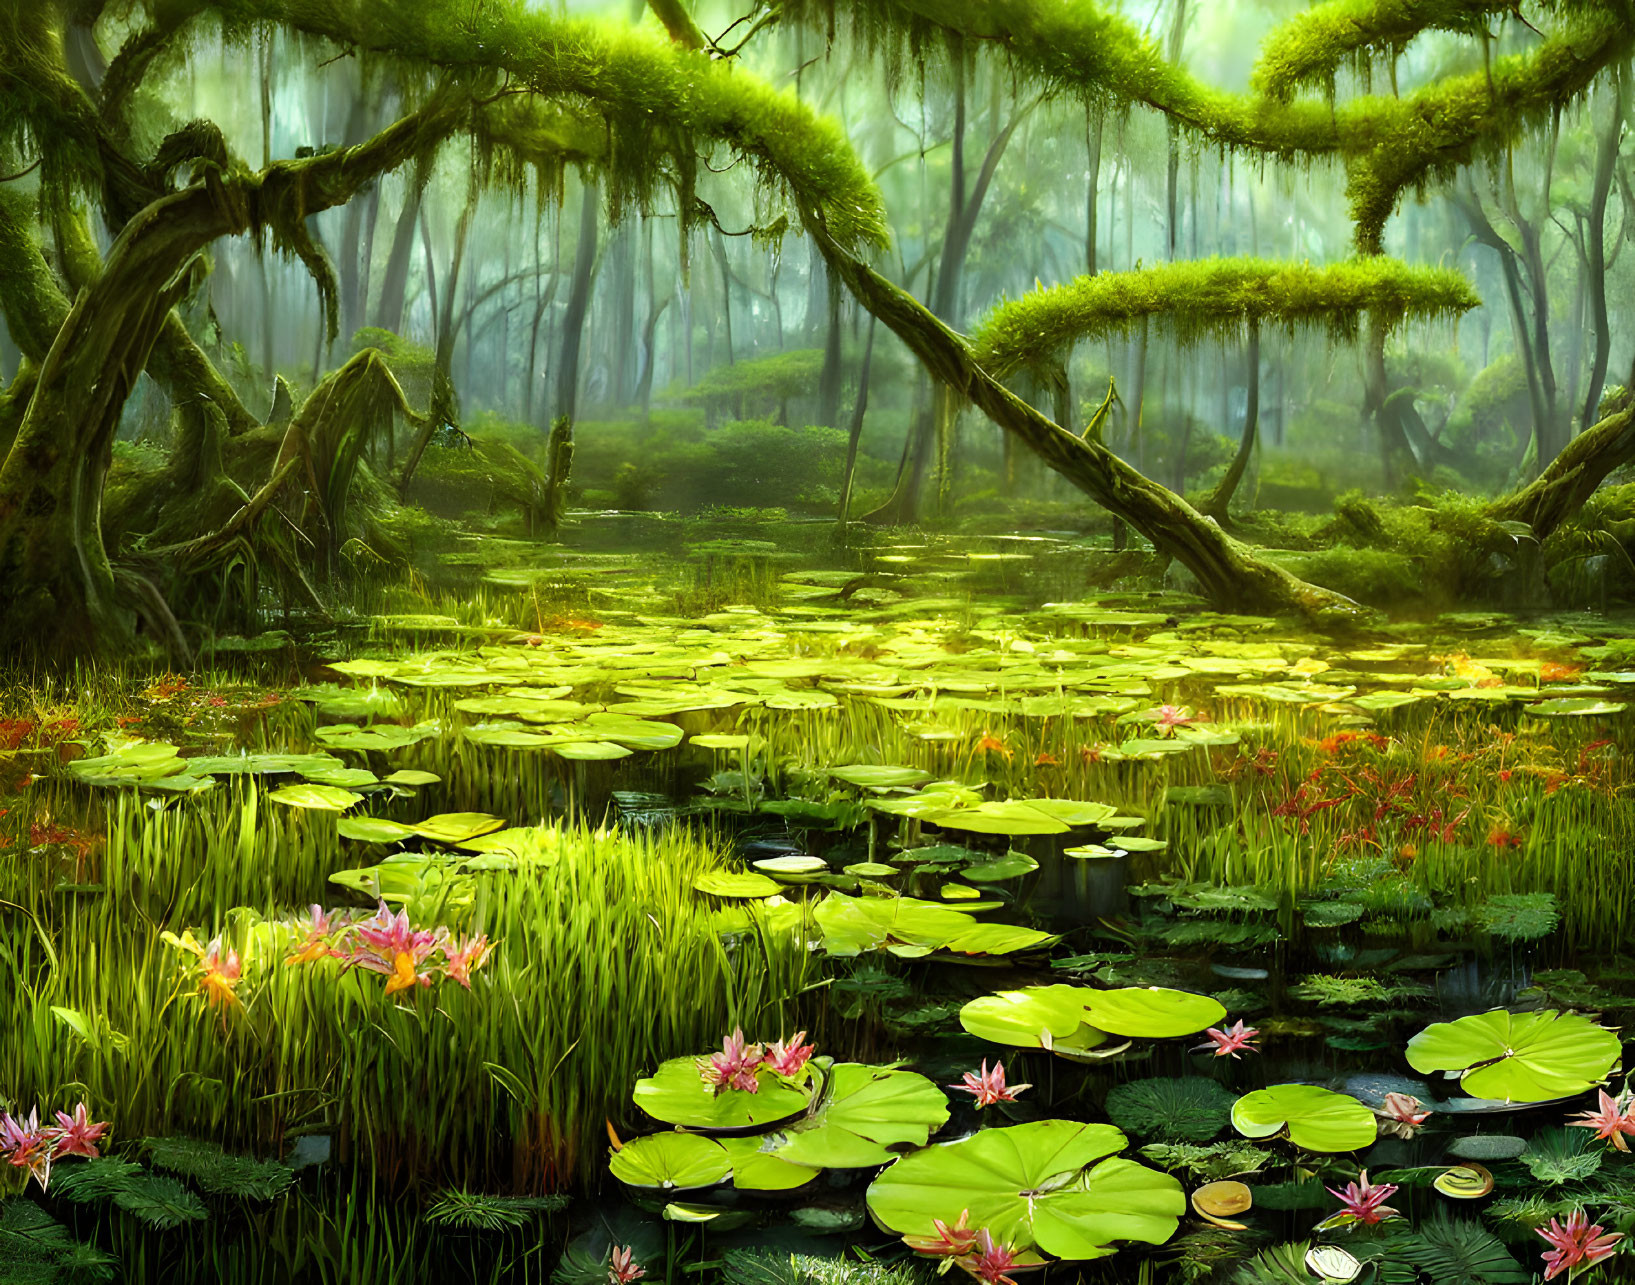 Tranquil swamp scene with lily pads, lotus flowers, moss-covered trees.